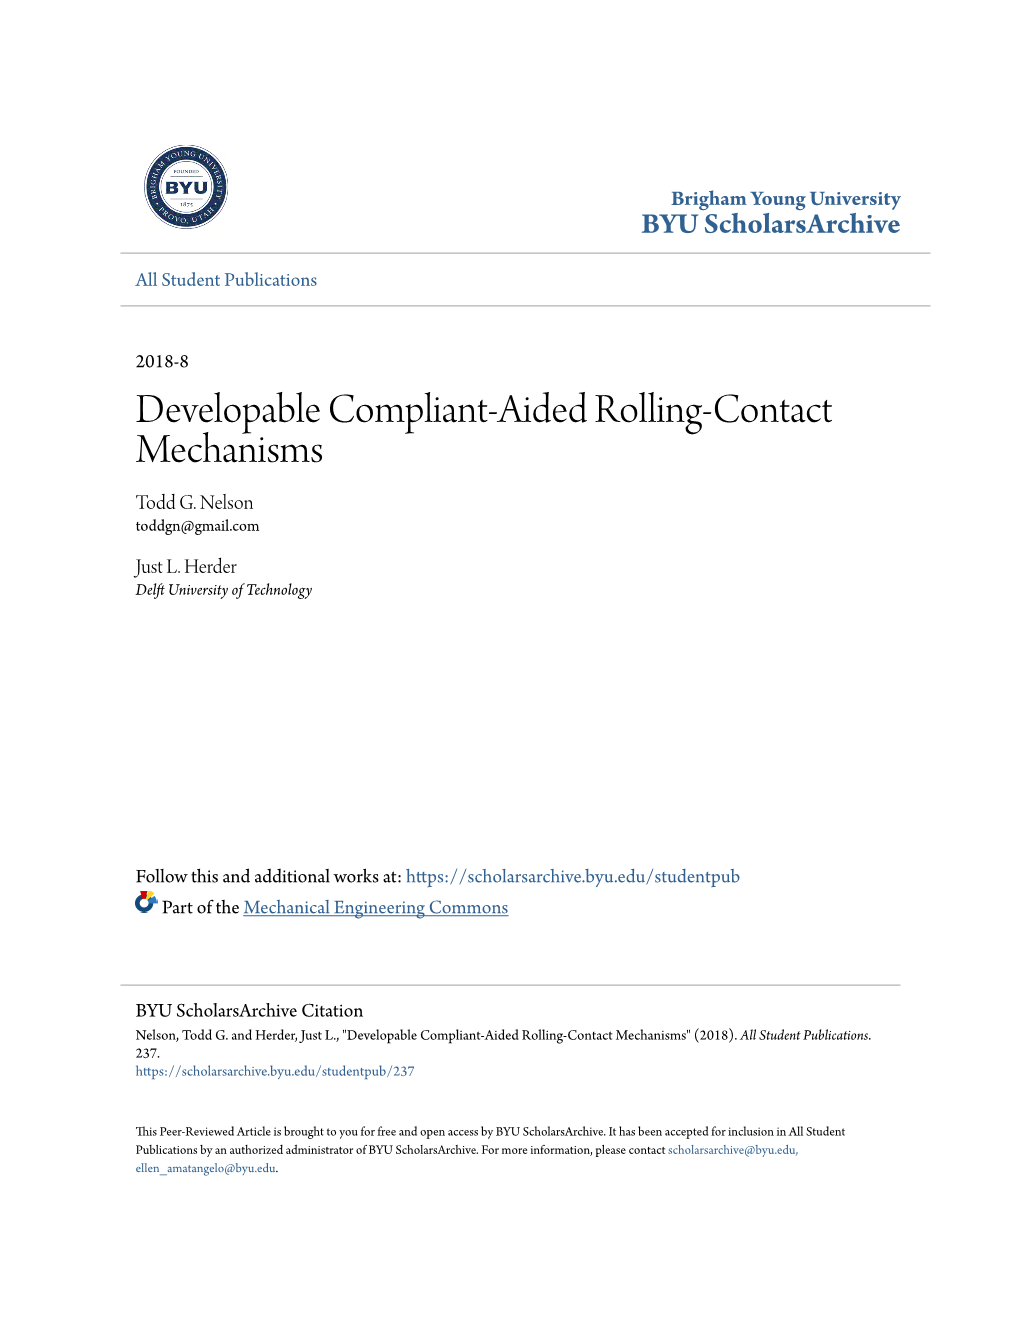 Developable Compliant-Aided Rolling-Contact Mechanisms Todd G